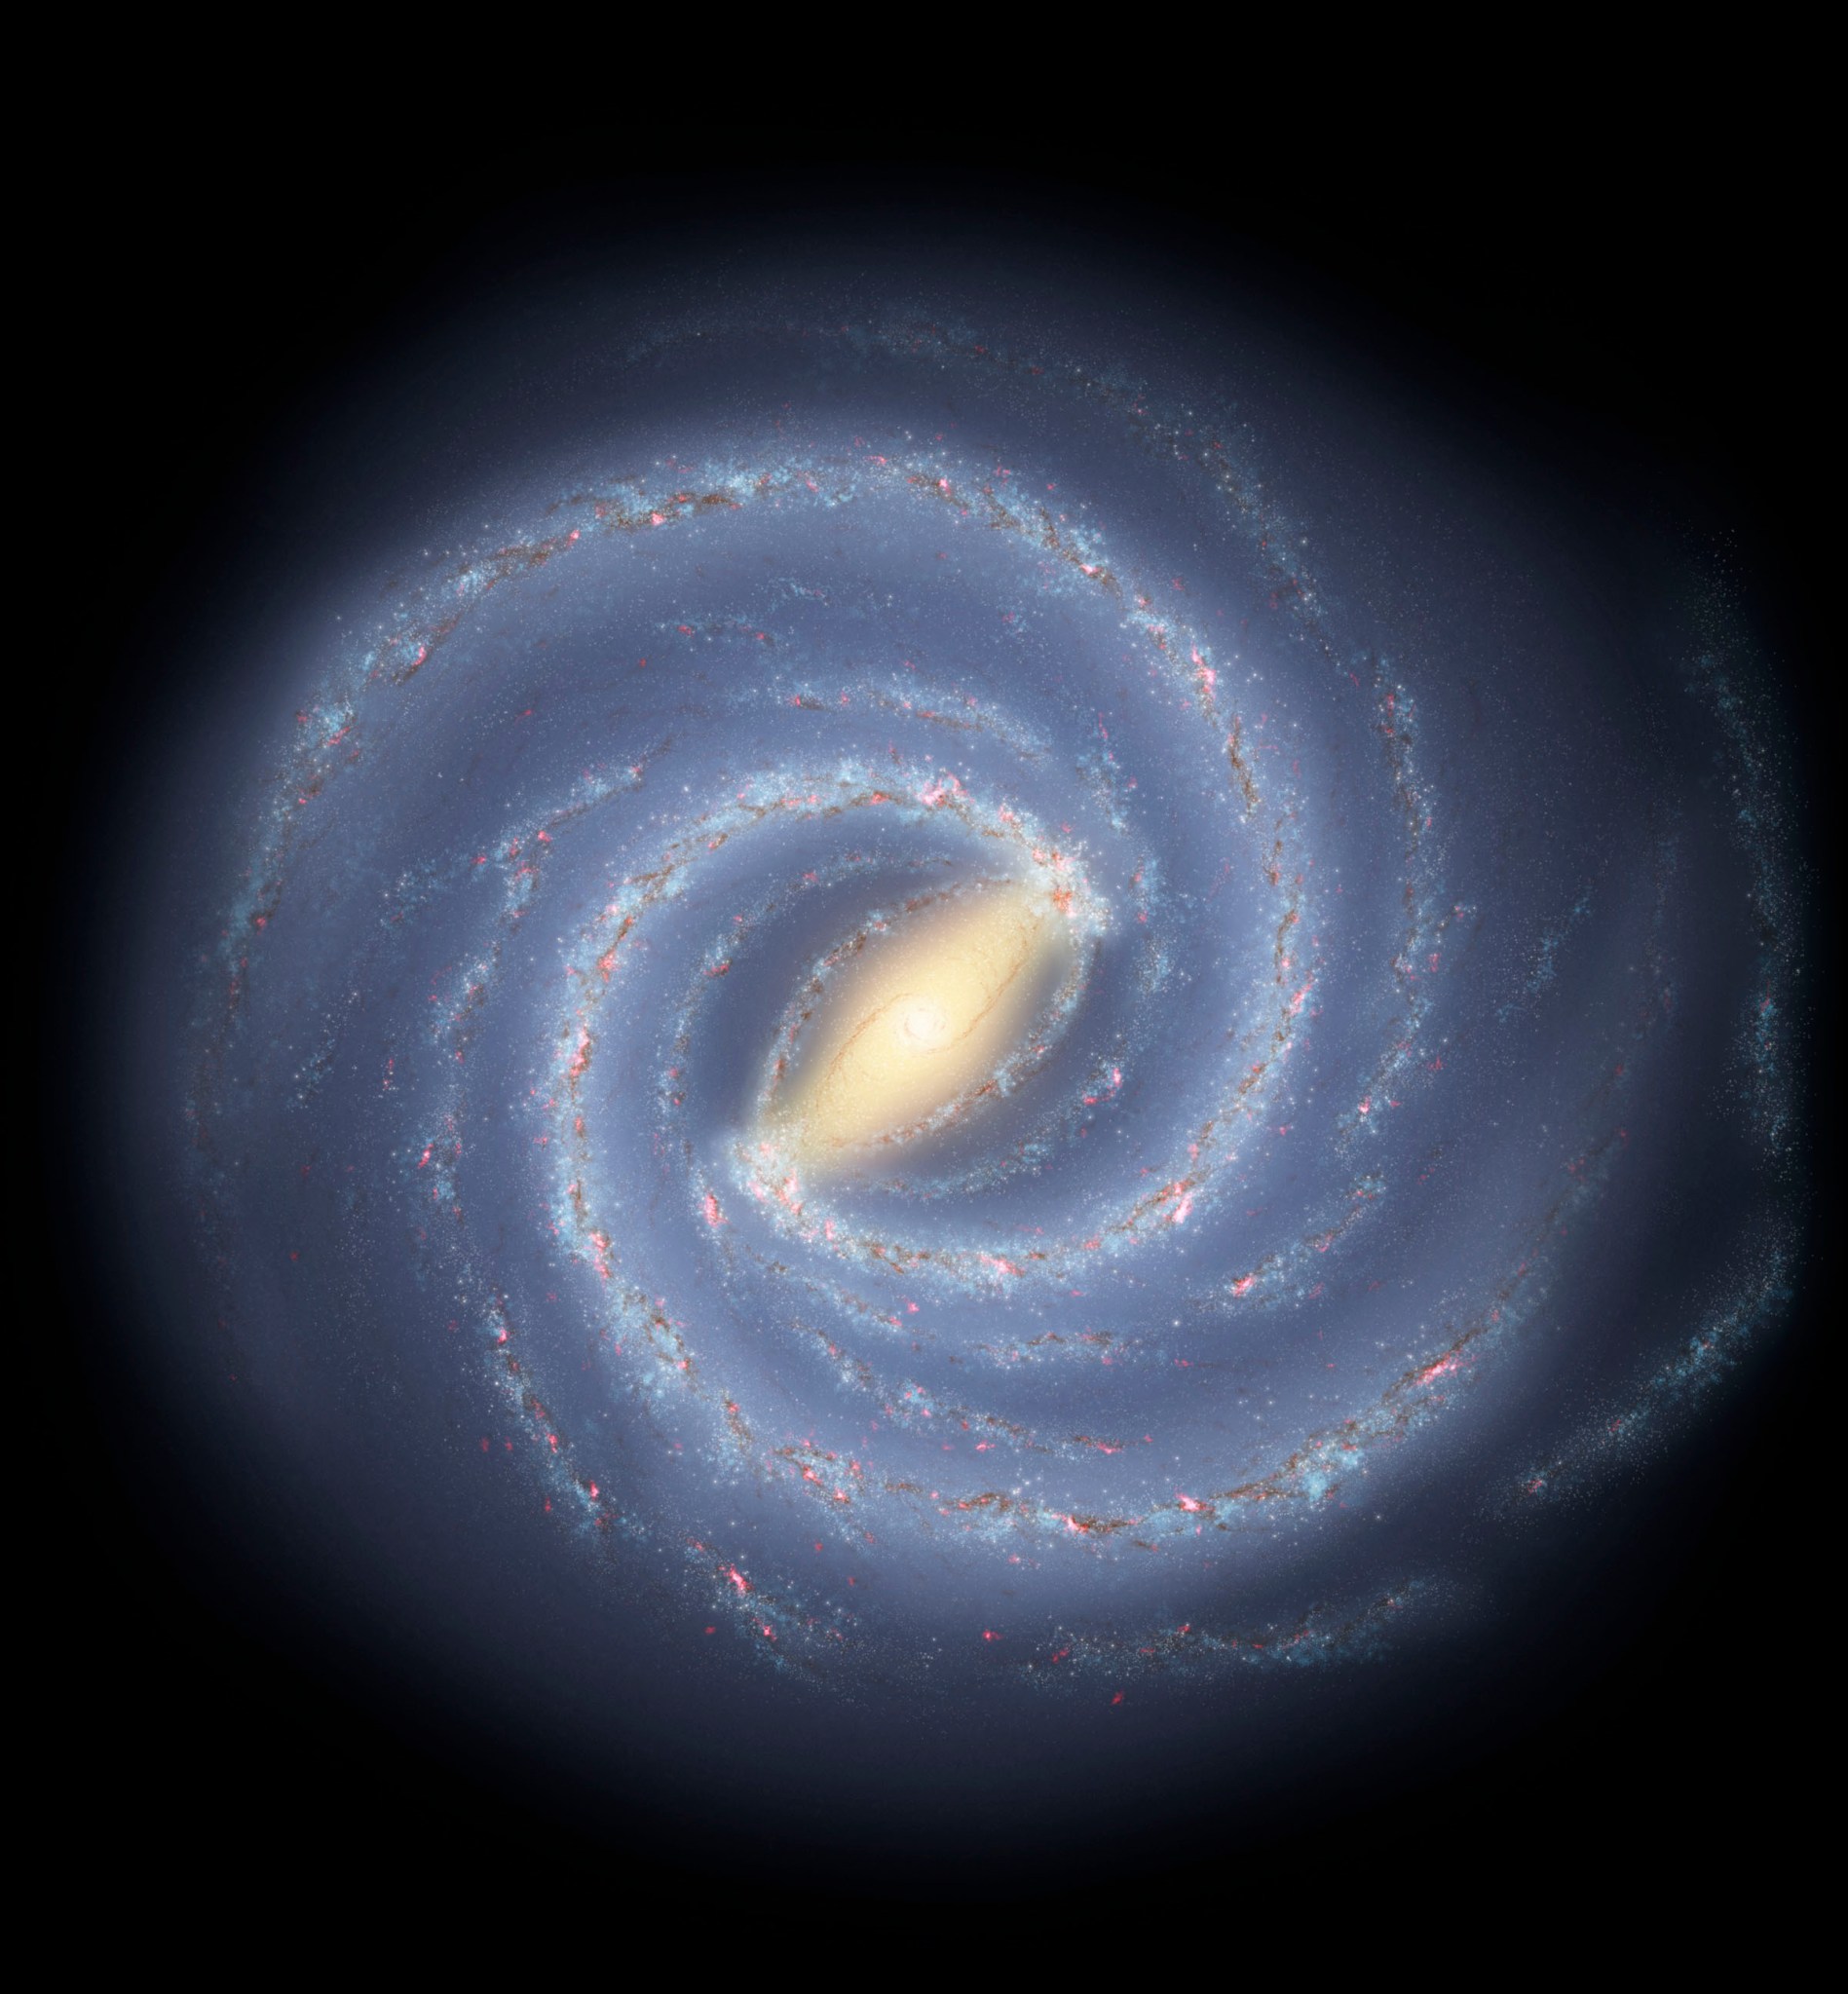 Illustration of the Milky Way